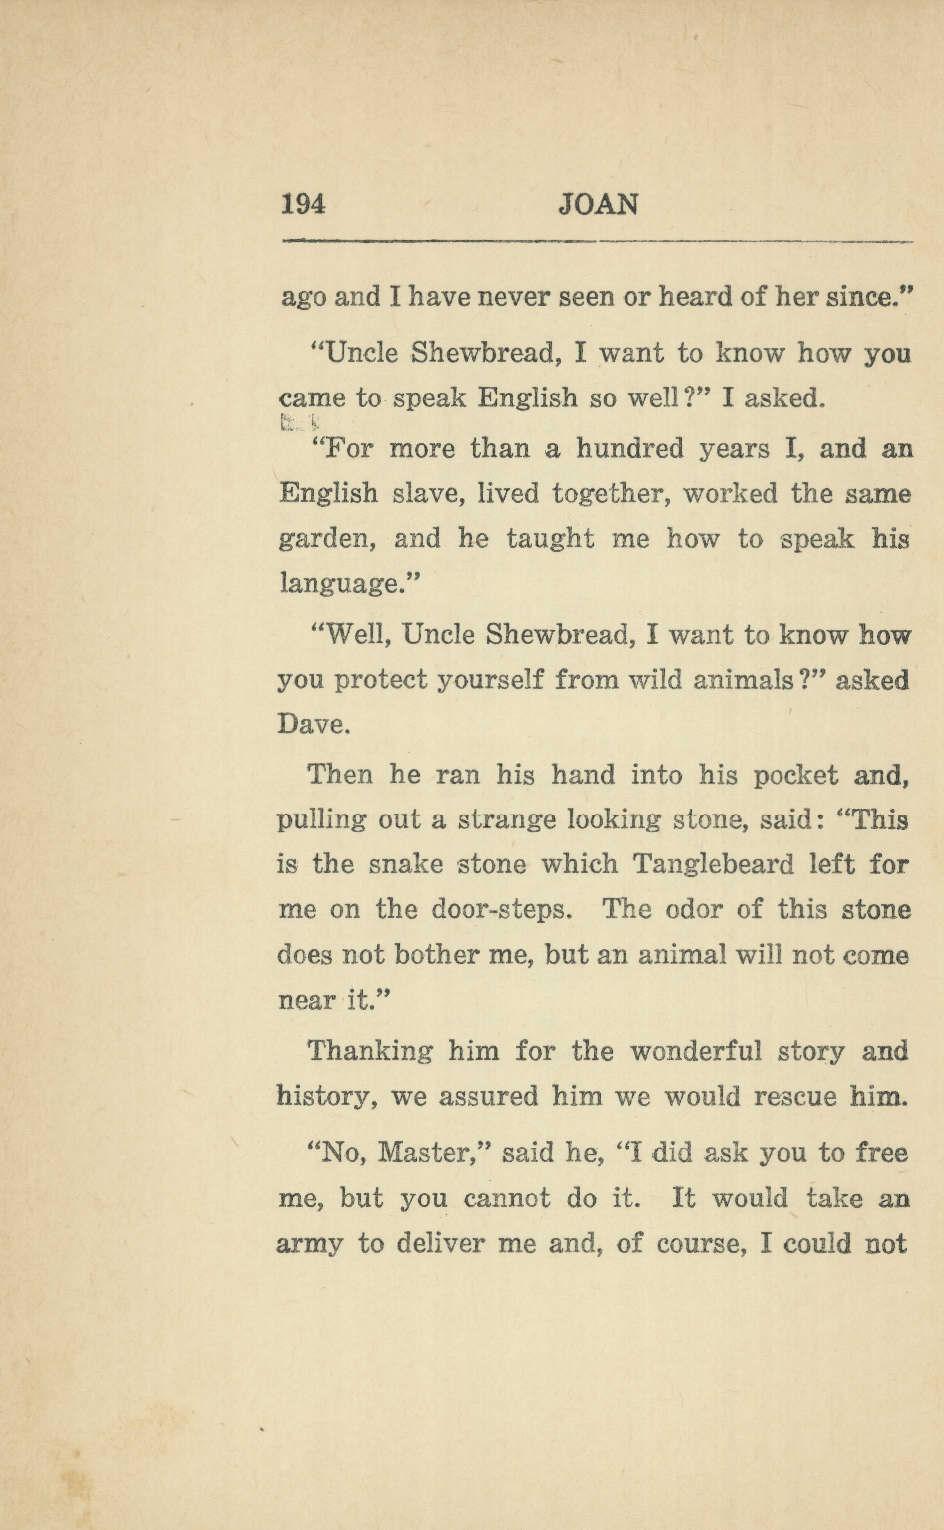 194 JOAN ago and I have never seen or heard of her since." "Uncle Shewbread, I want to know how you came to speak English so well?" I asked.